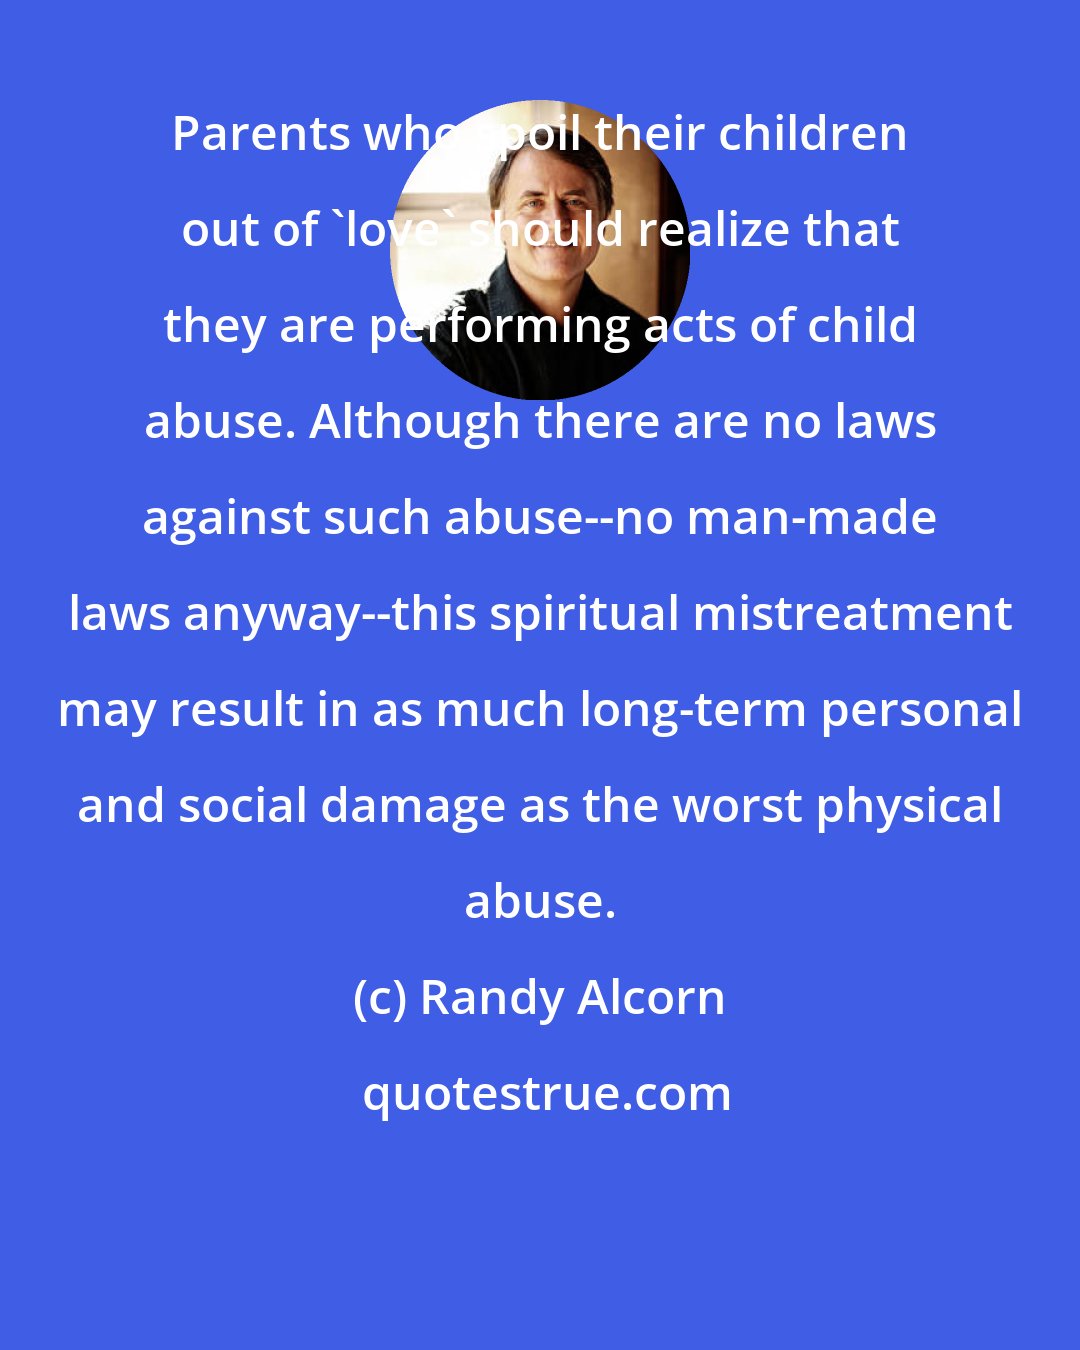 Randy Alcorn: Parents who spoil their children out of 'love' should realize that they are performing acts of child abuse. Although there are no laws against such abuse--no man-made laws anyway--this spiritual mistreatment may result in as much long-term personal and social damage as the worst physical abuse.